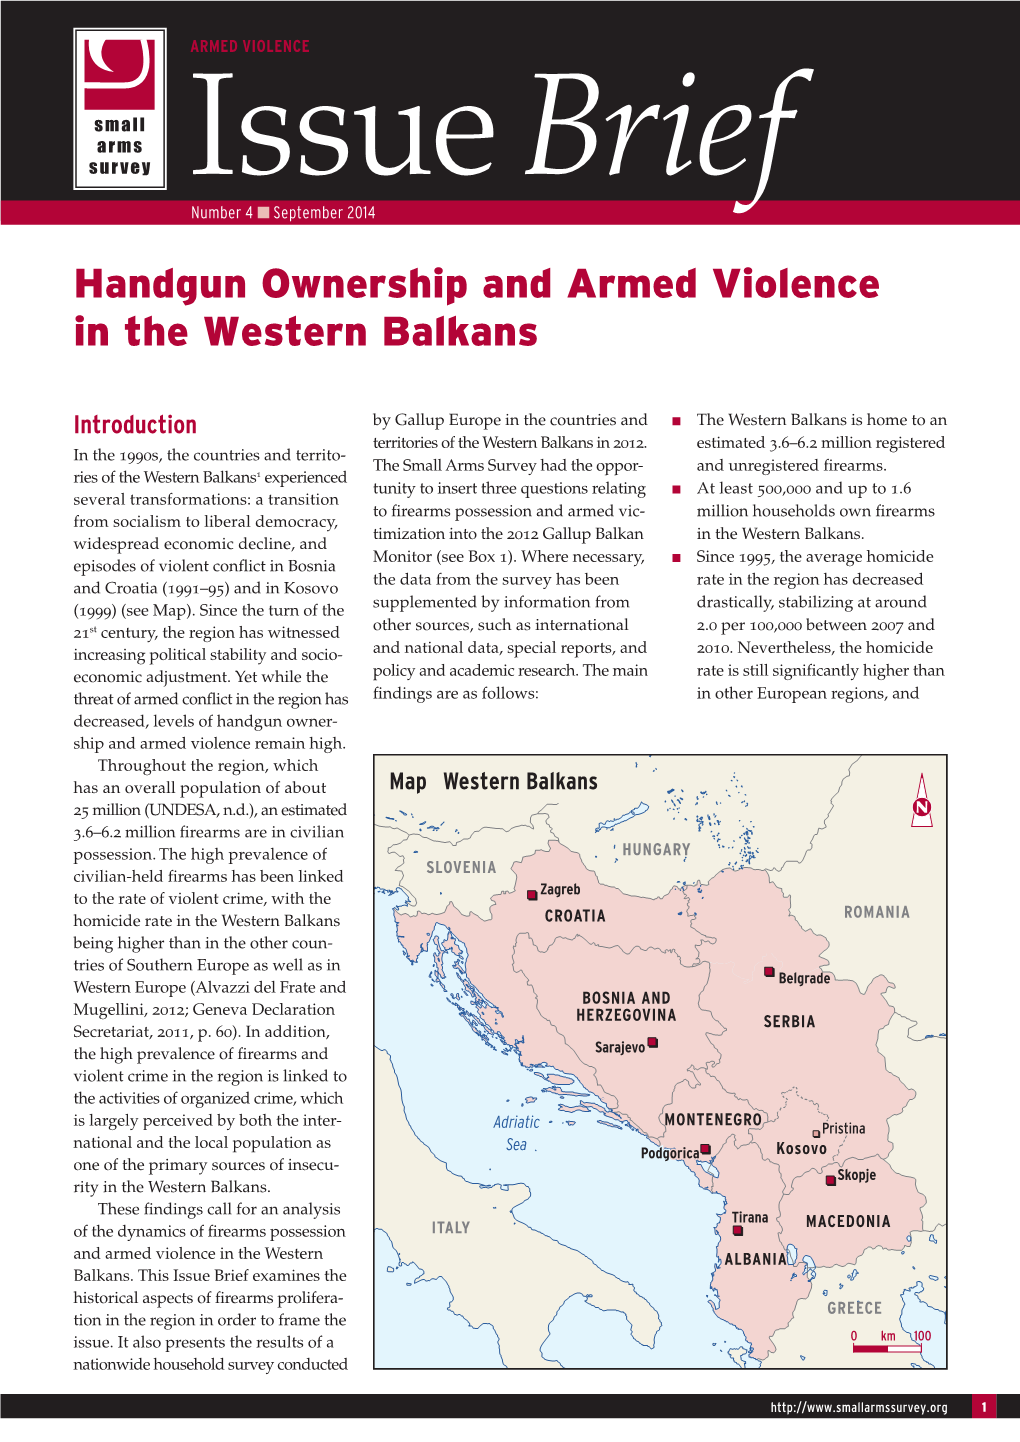 Handgun Ownership and Armed Violence in the Western Balkans